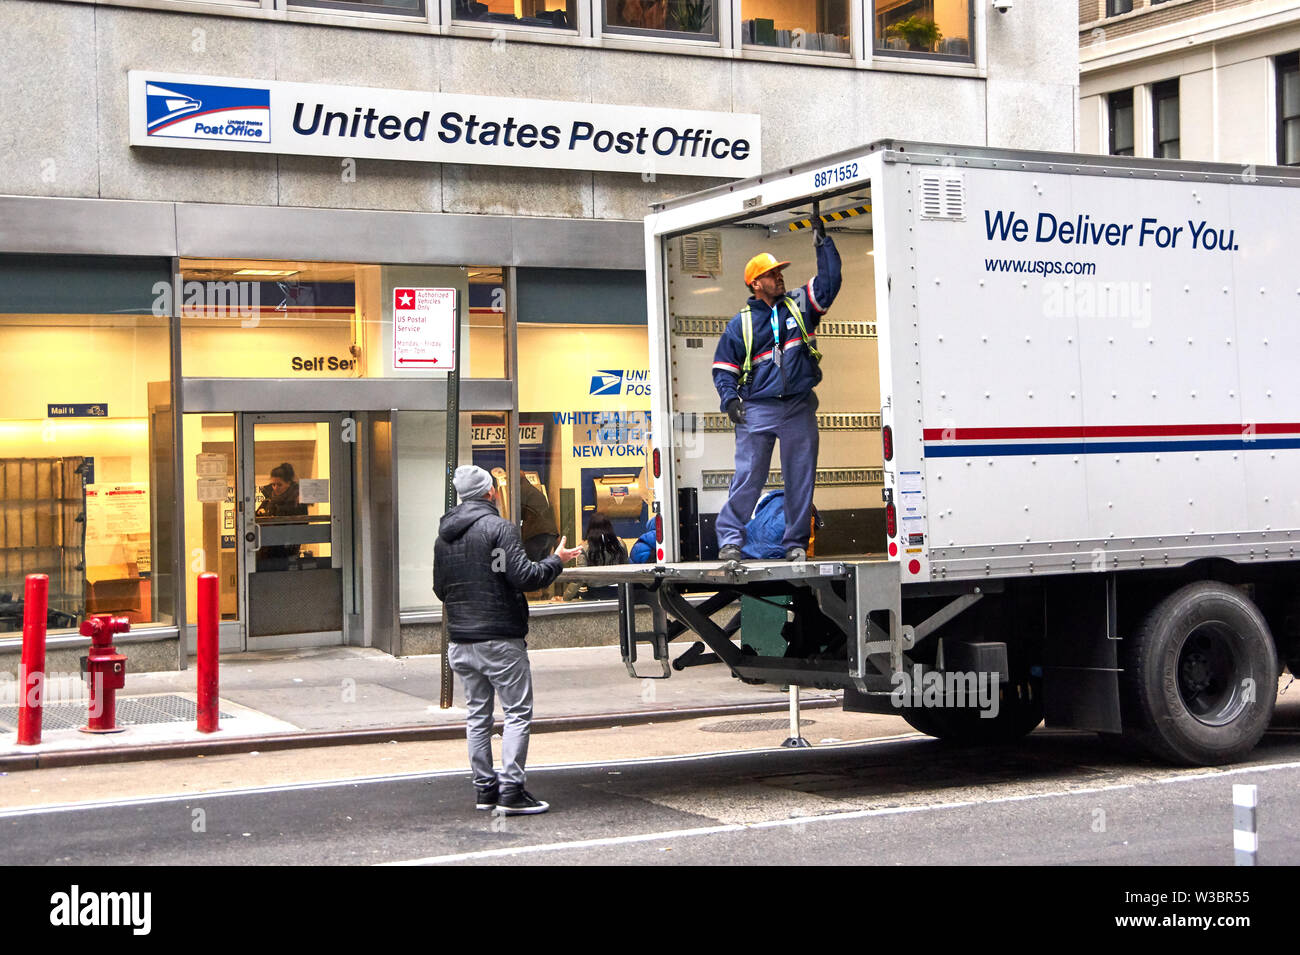 NEW YORK, USA - DECEMBER 14, 2018: USPS postman on a mail delivery truck in New York. USPS is an independent agenc of US federal government responsibl Stock Photo